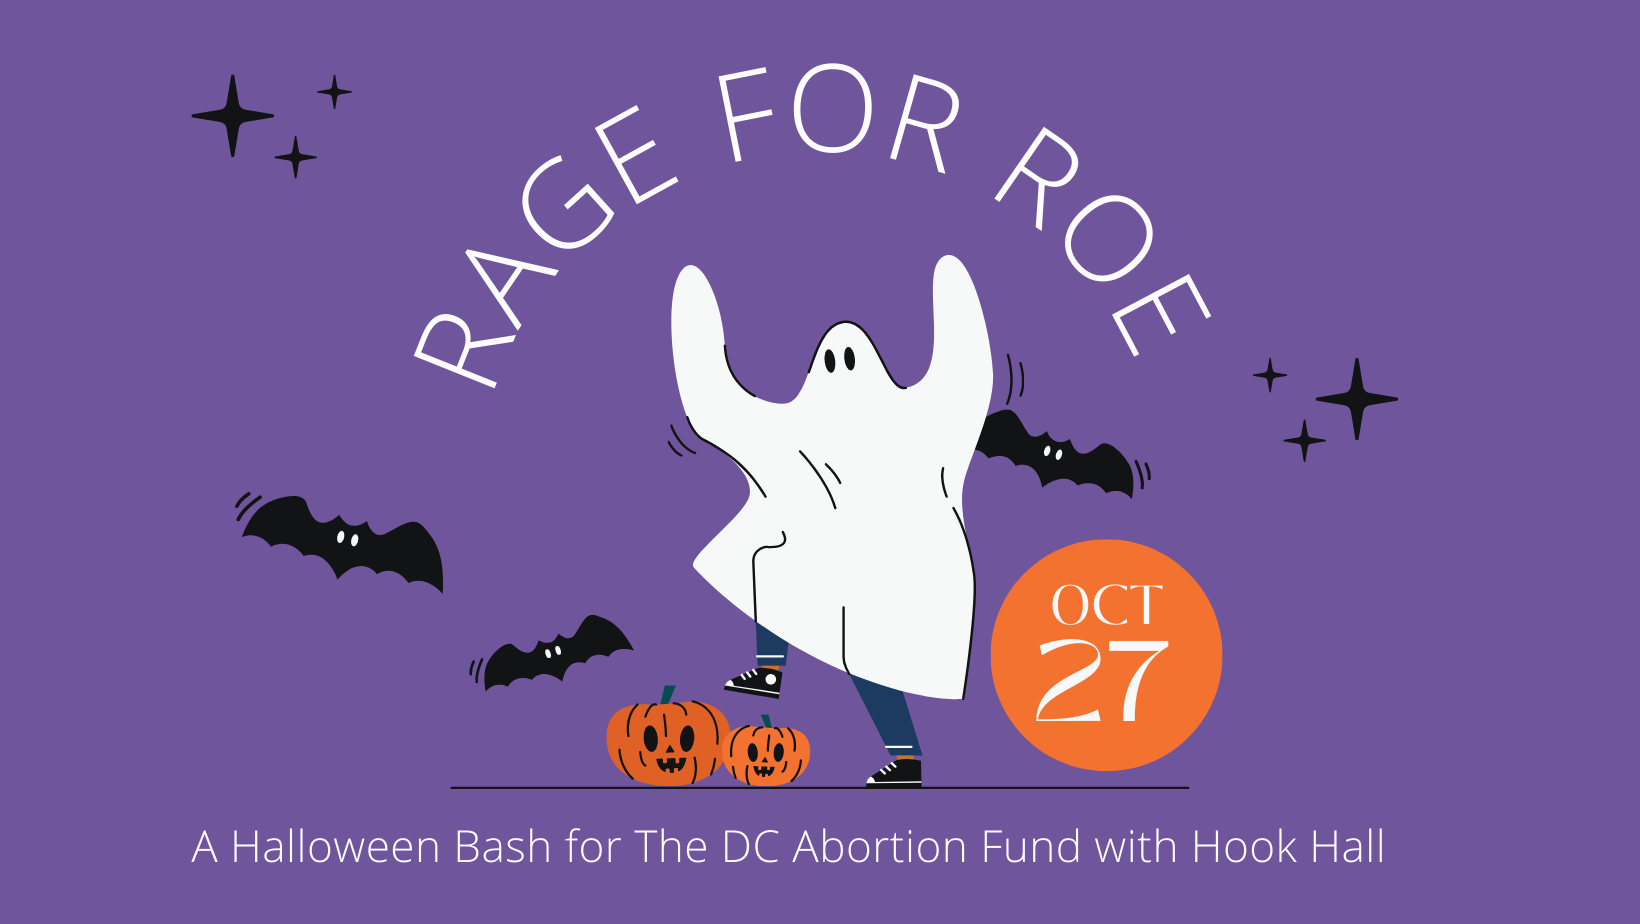 Rage for Roe: A Halloween Bash to Support the DC Abortion Fund